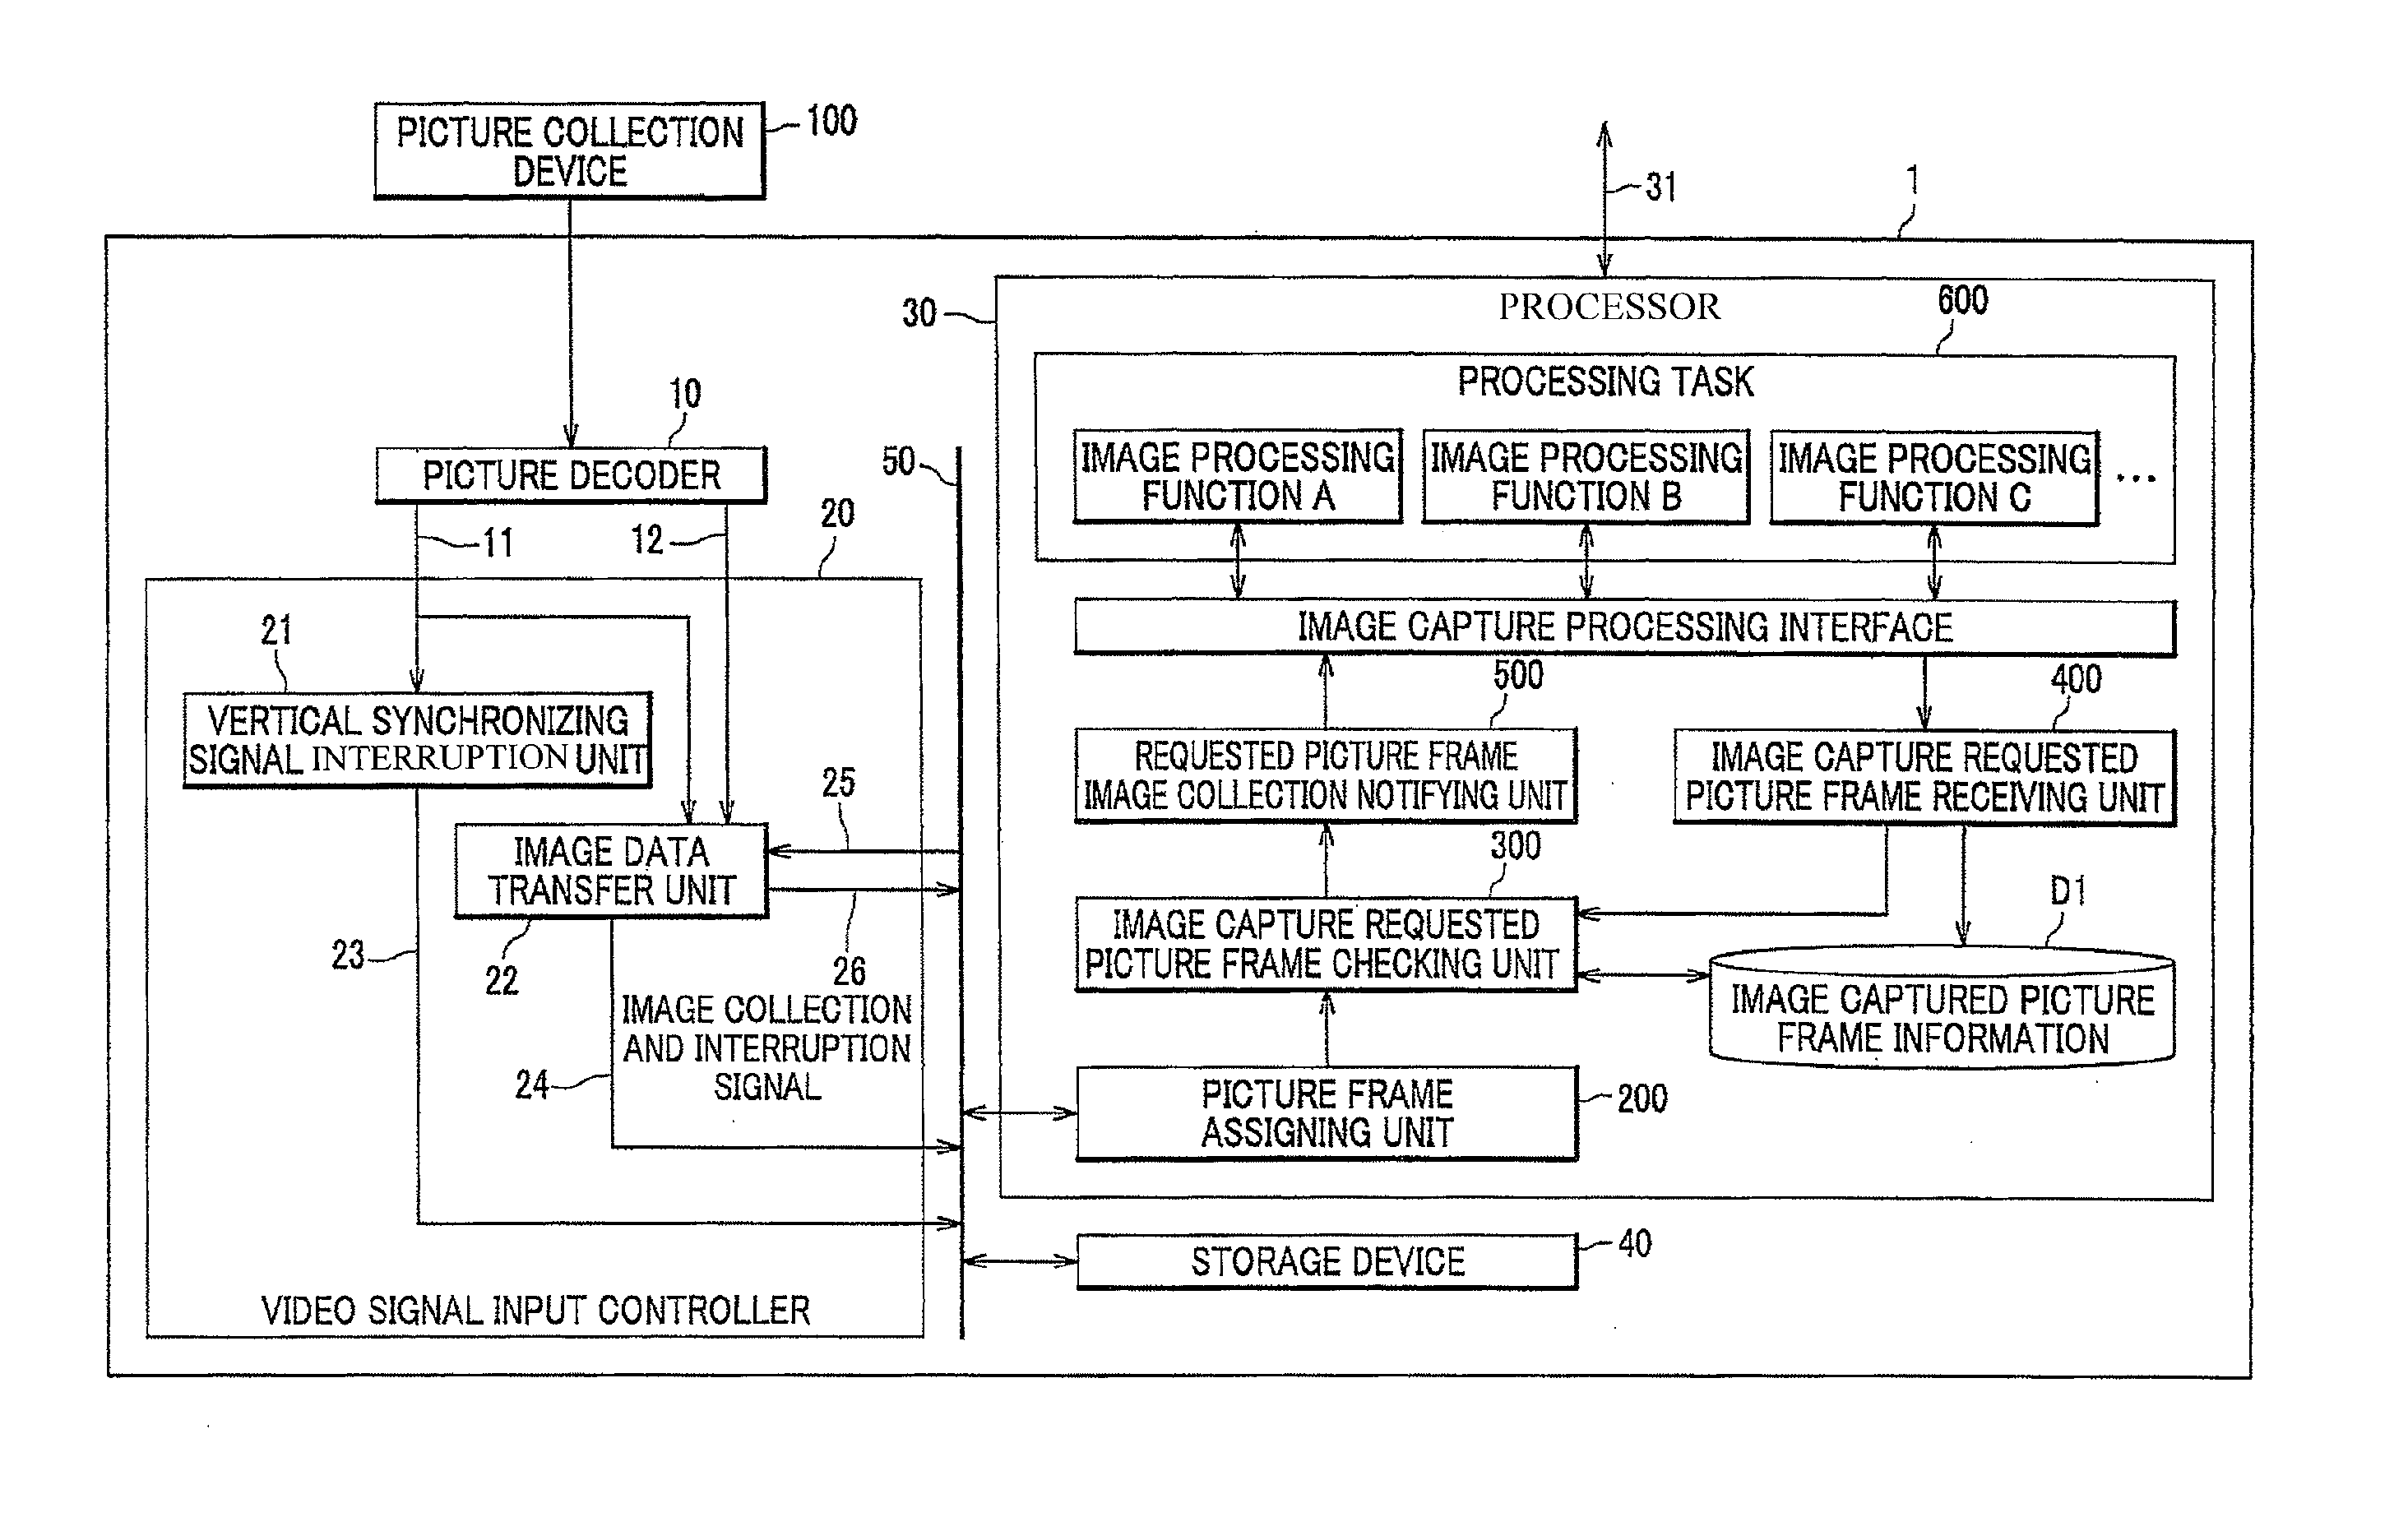 Image processing device for controlling a plurality of tasks